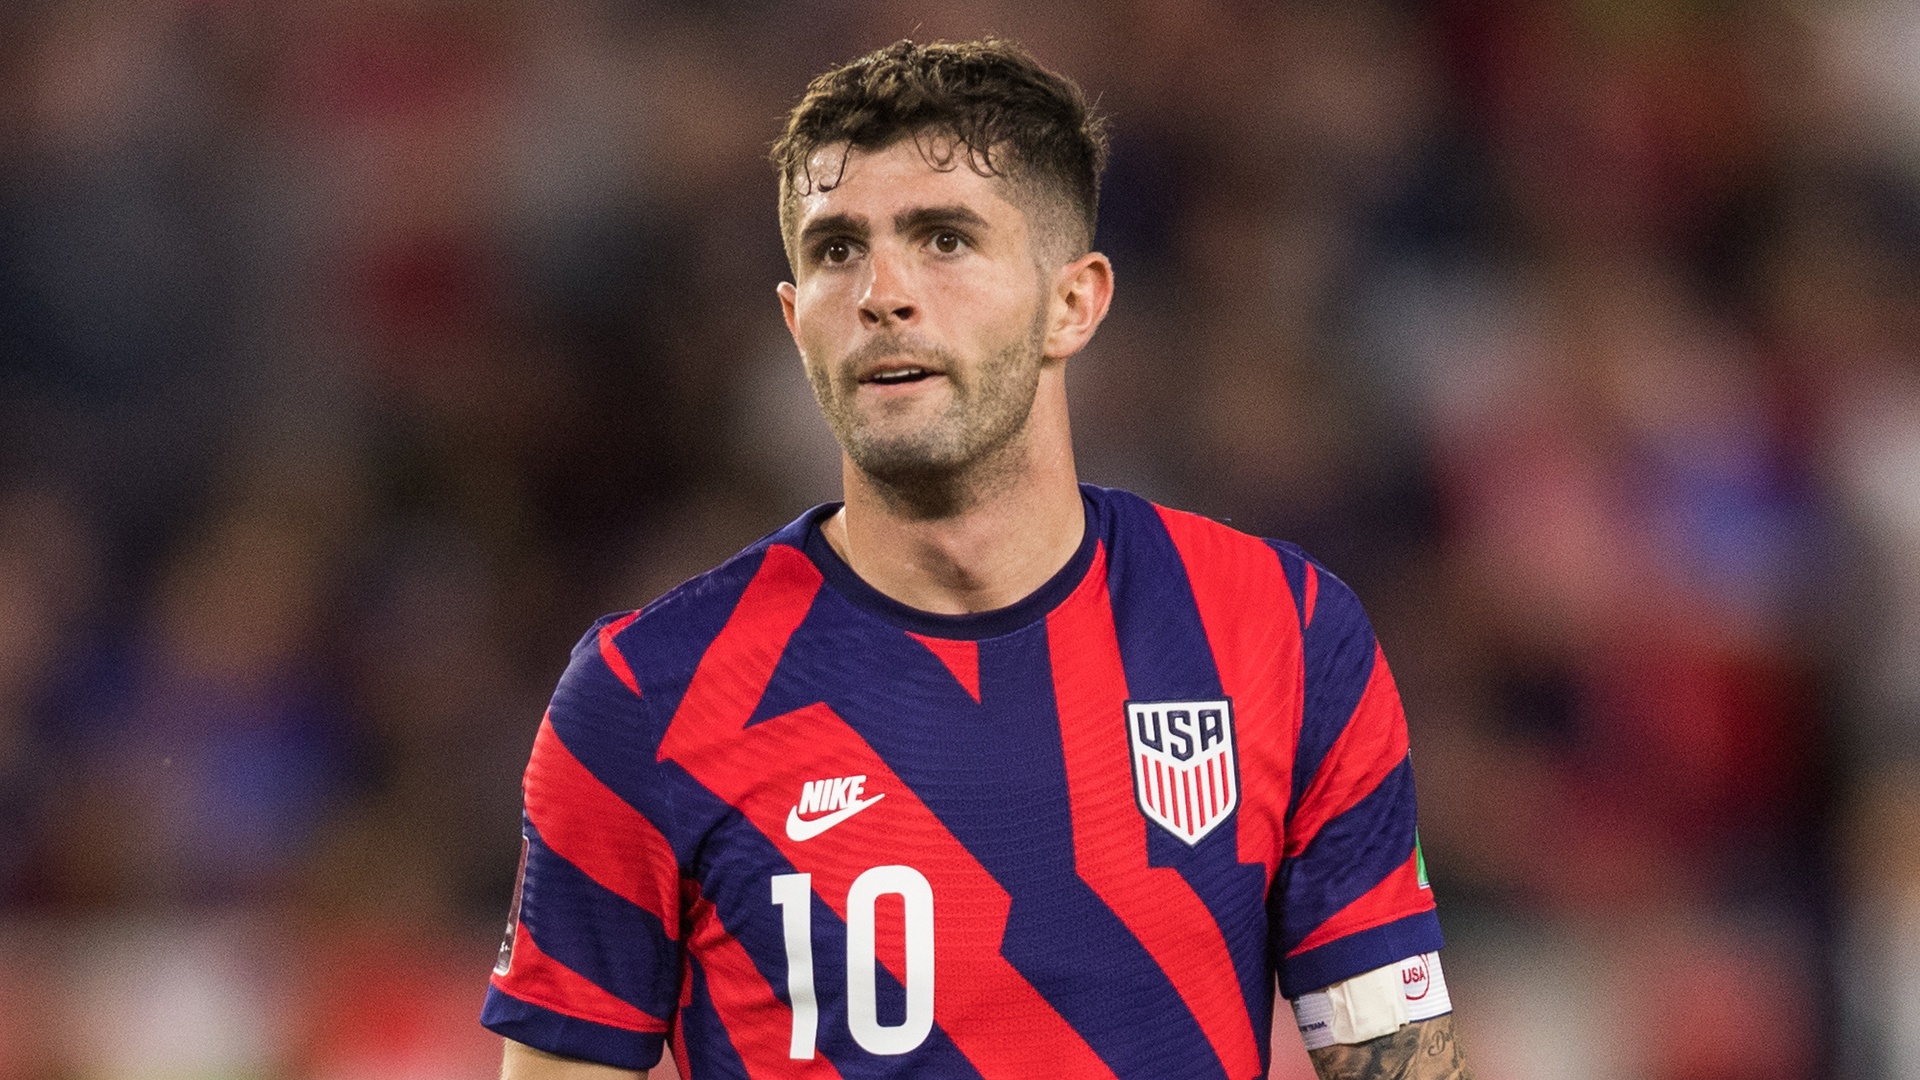 U.S. lauds wounded hero Pulisic for getting them into last 16